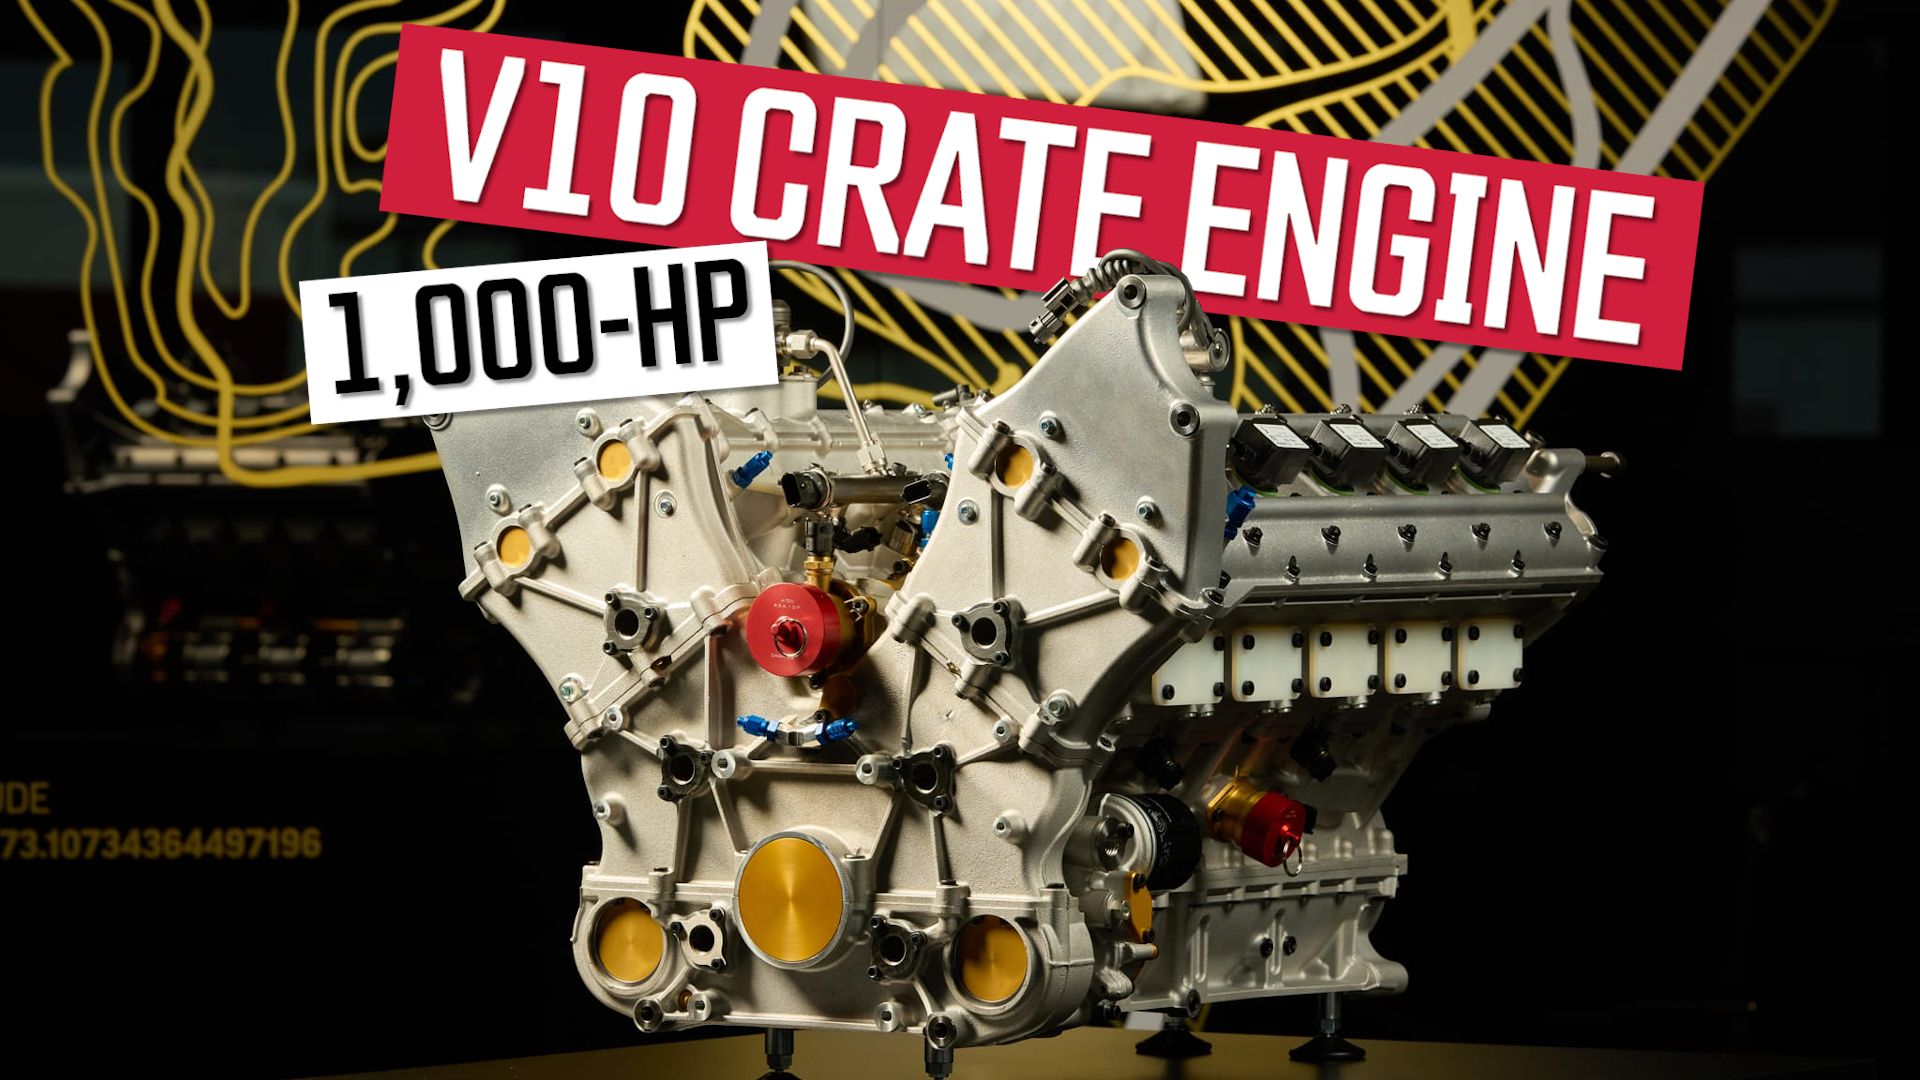 Rodin V10 Crate Engine Feature